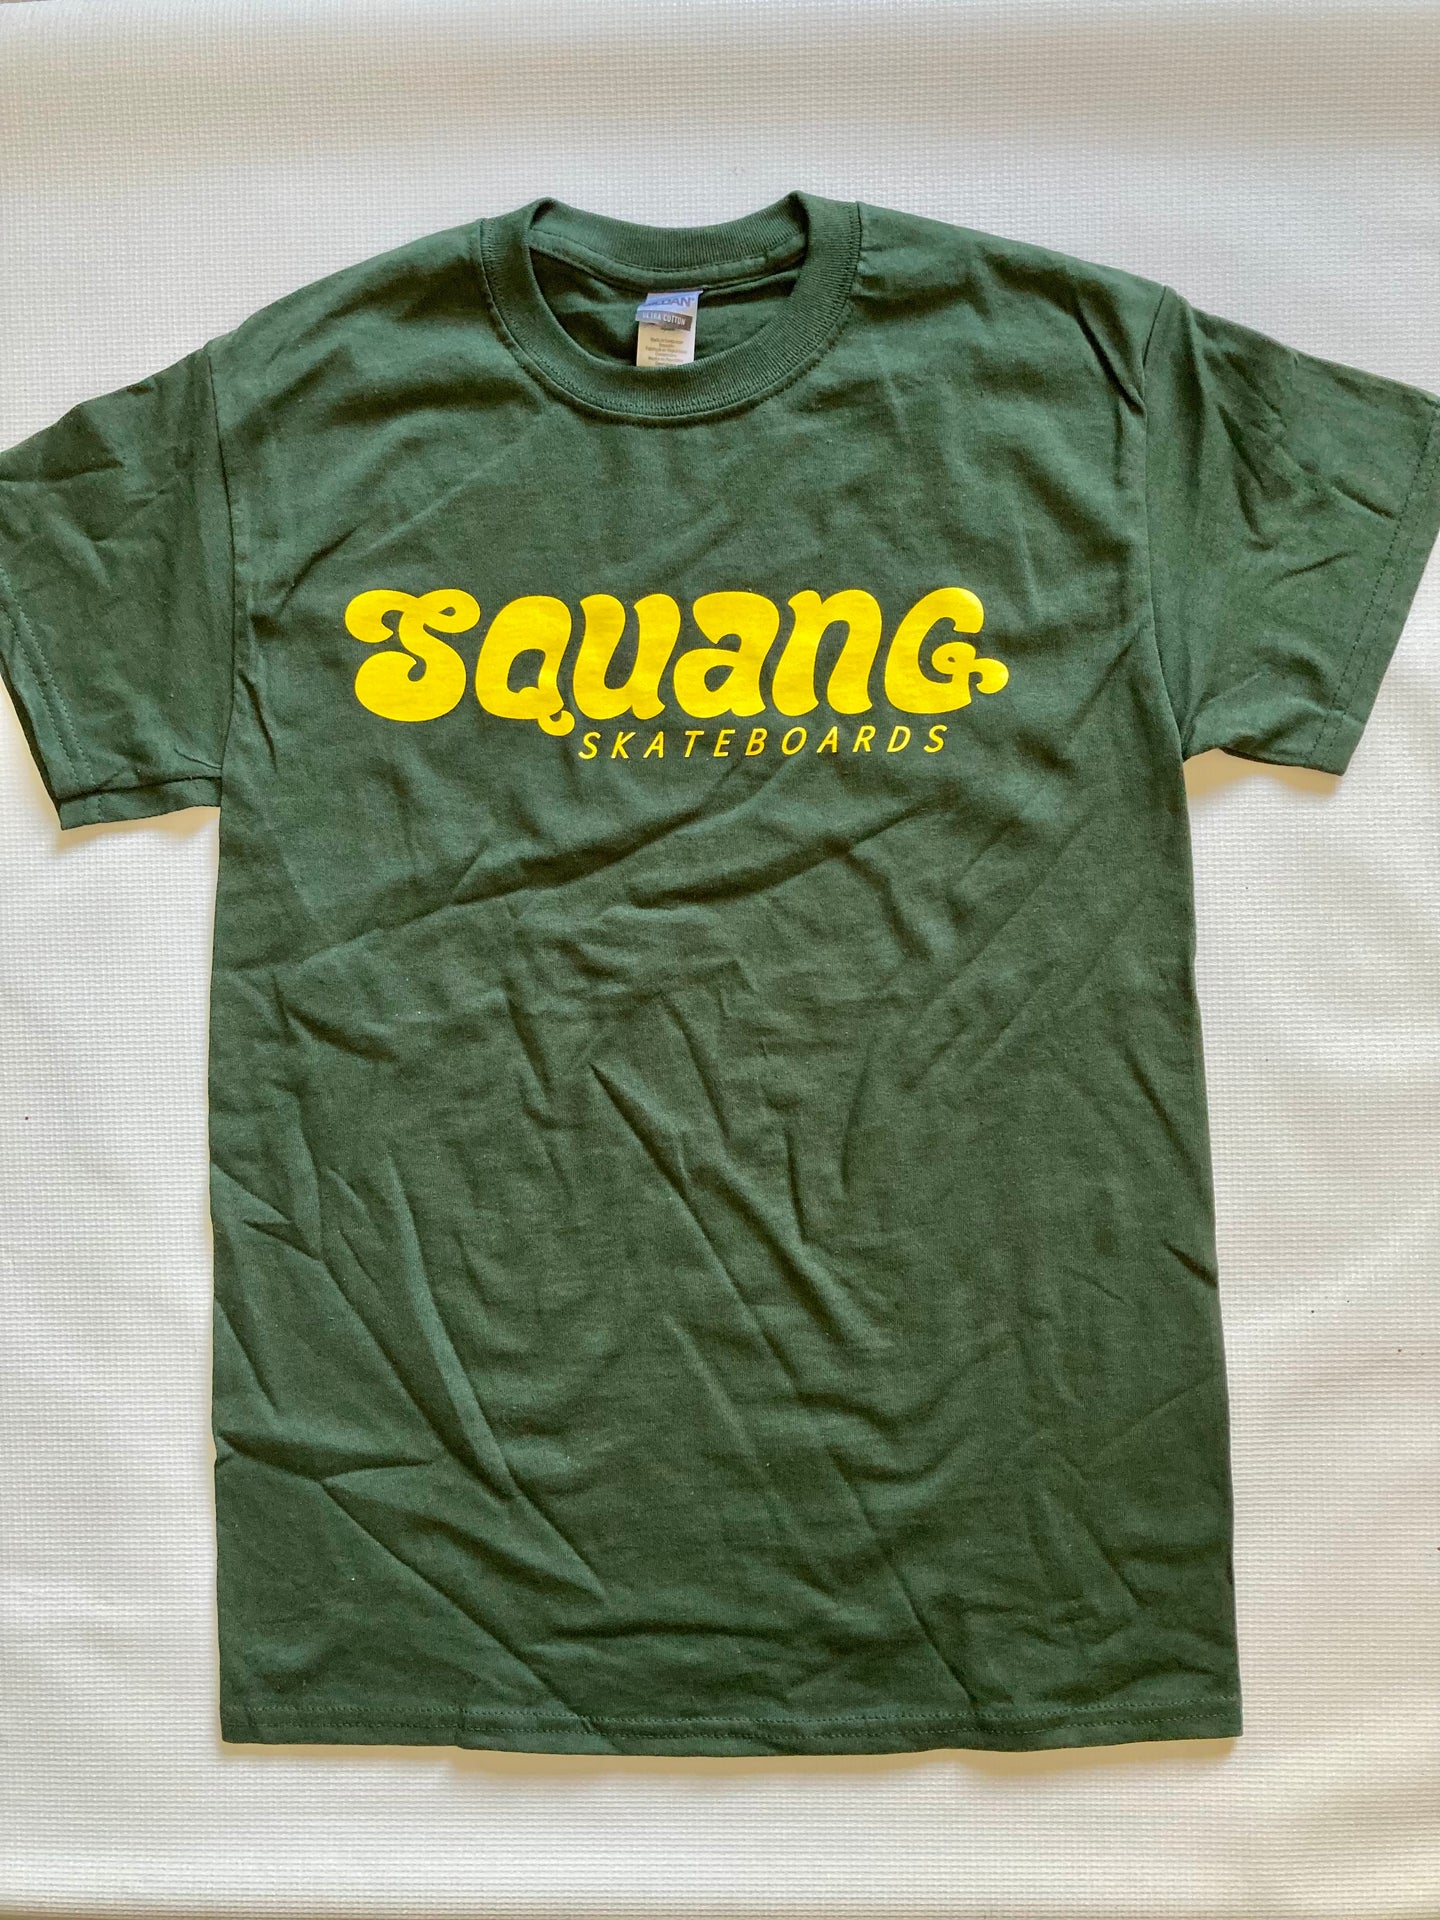 Squang Tee